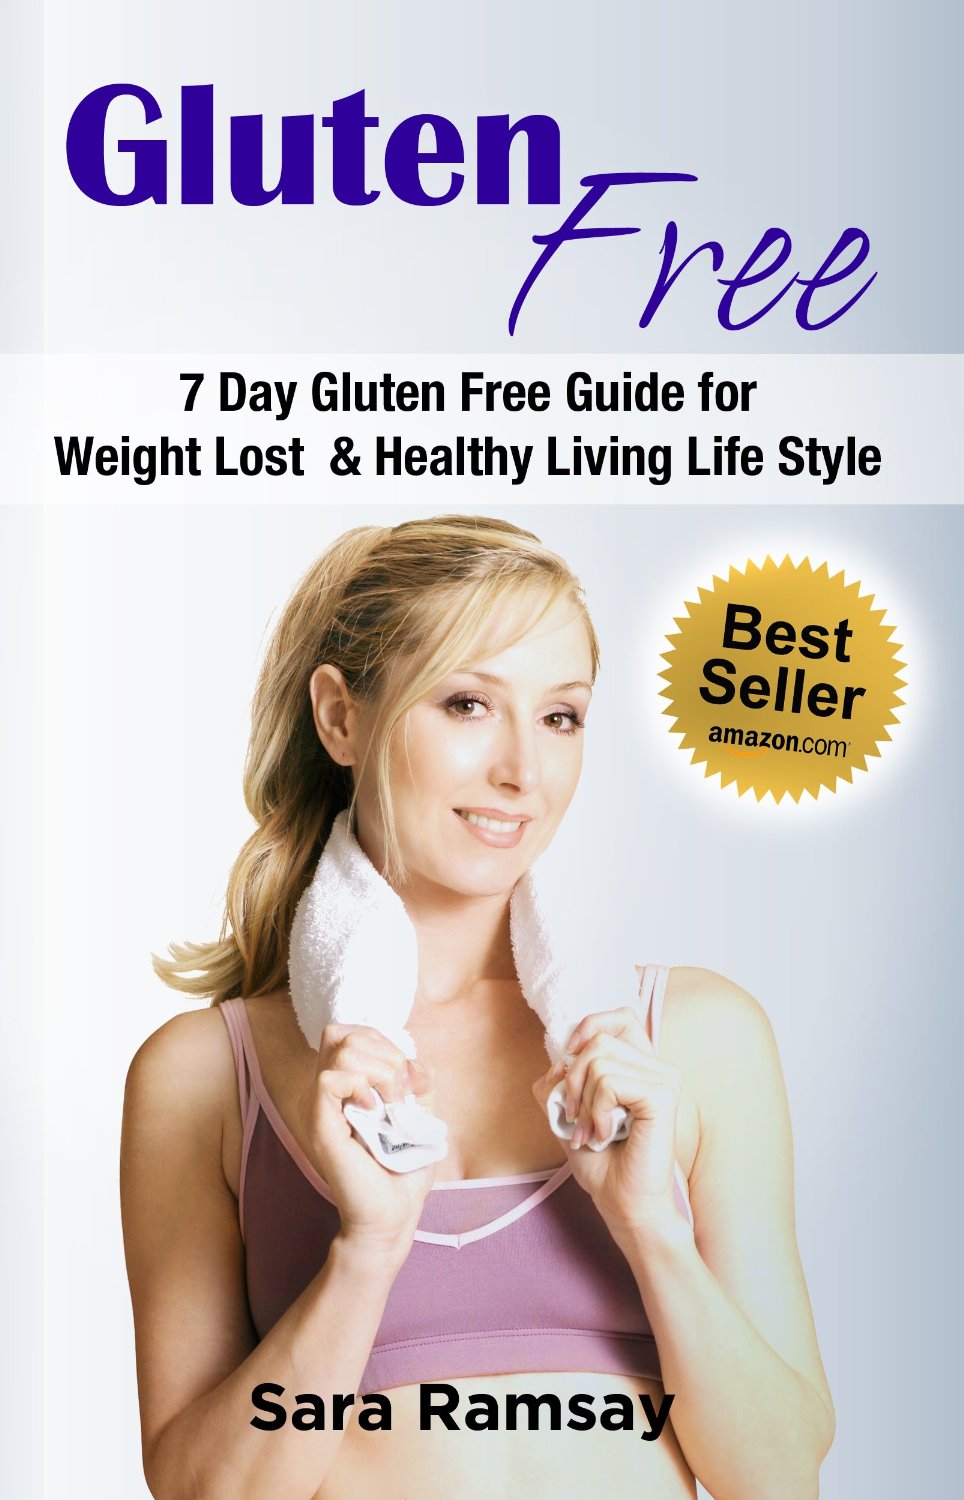 Gluten Free: 7 Day Gluten Free Guide for Weight Lost and Healthy Living Life Style by Sara Ramsay